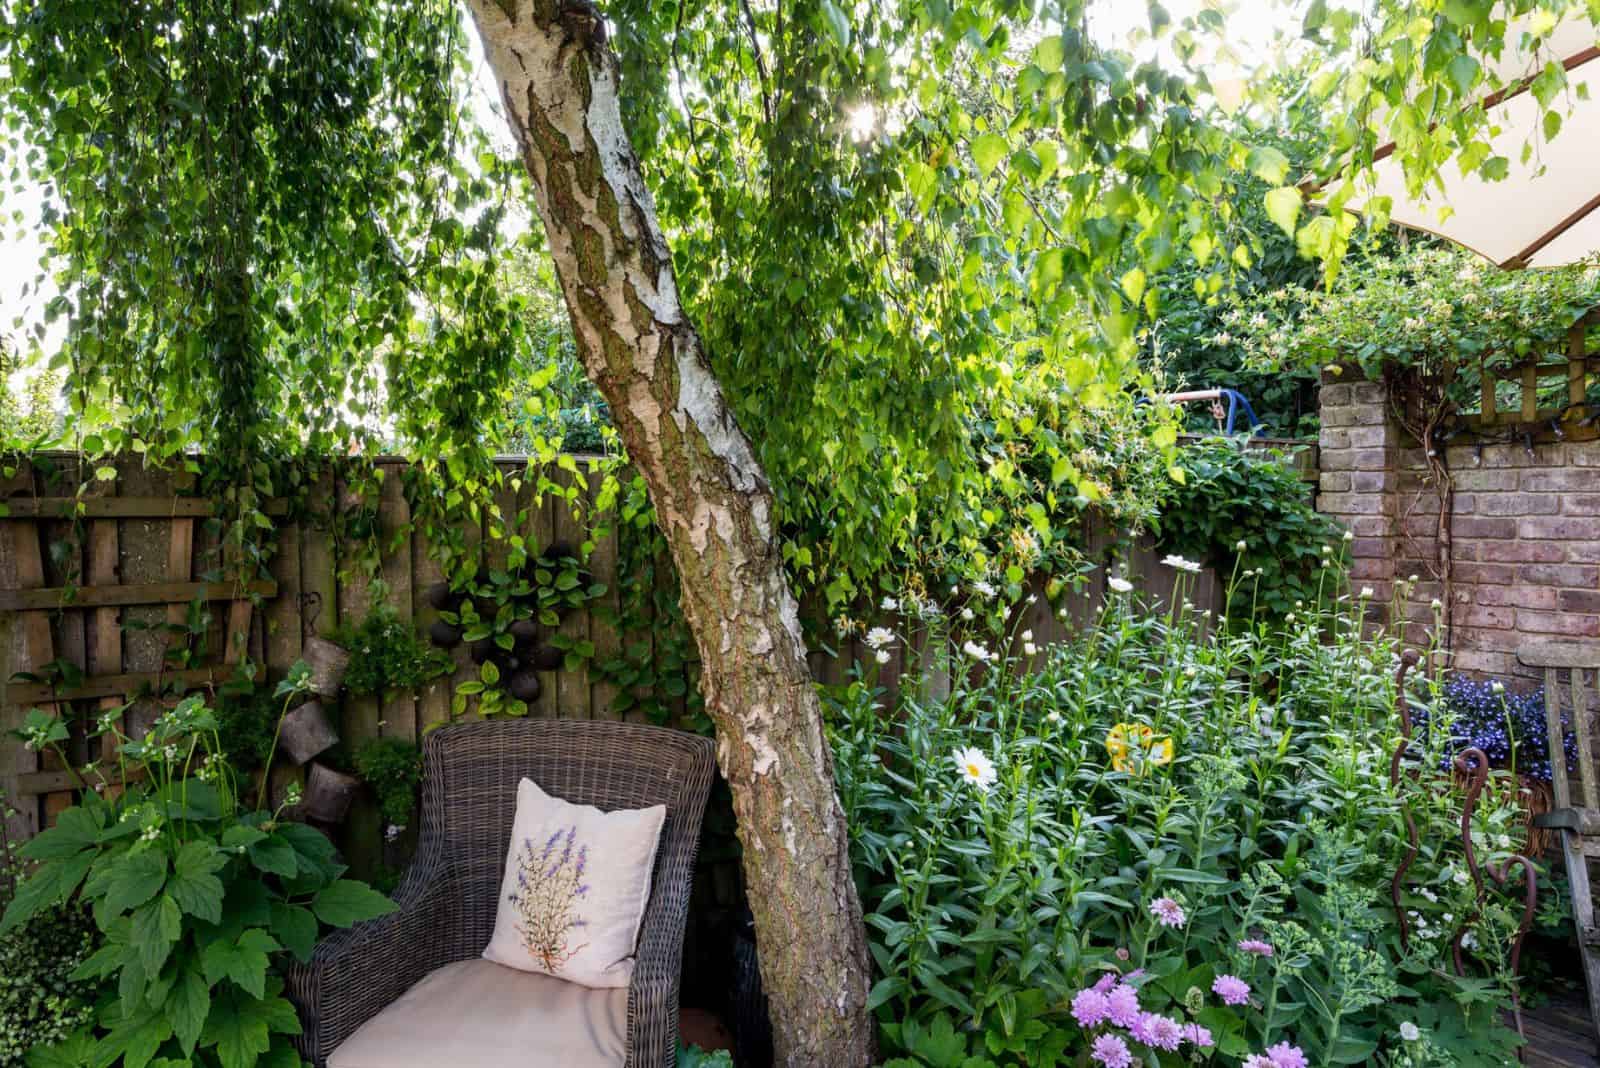 trees in the garden with a chair